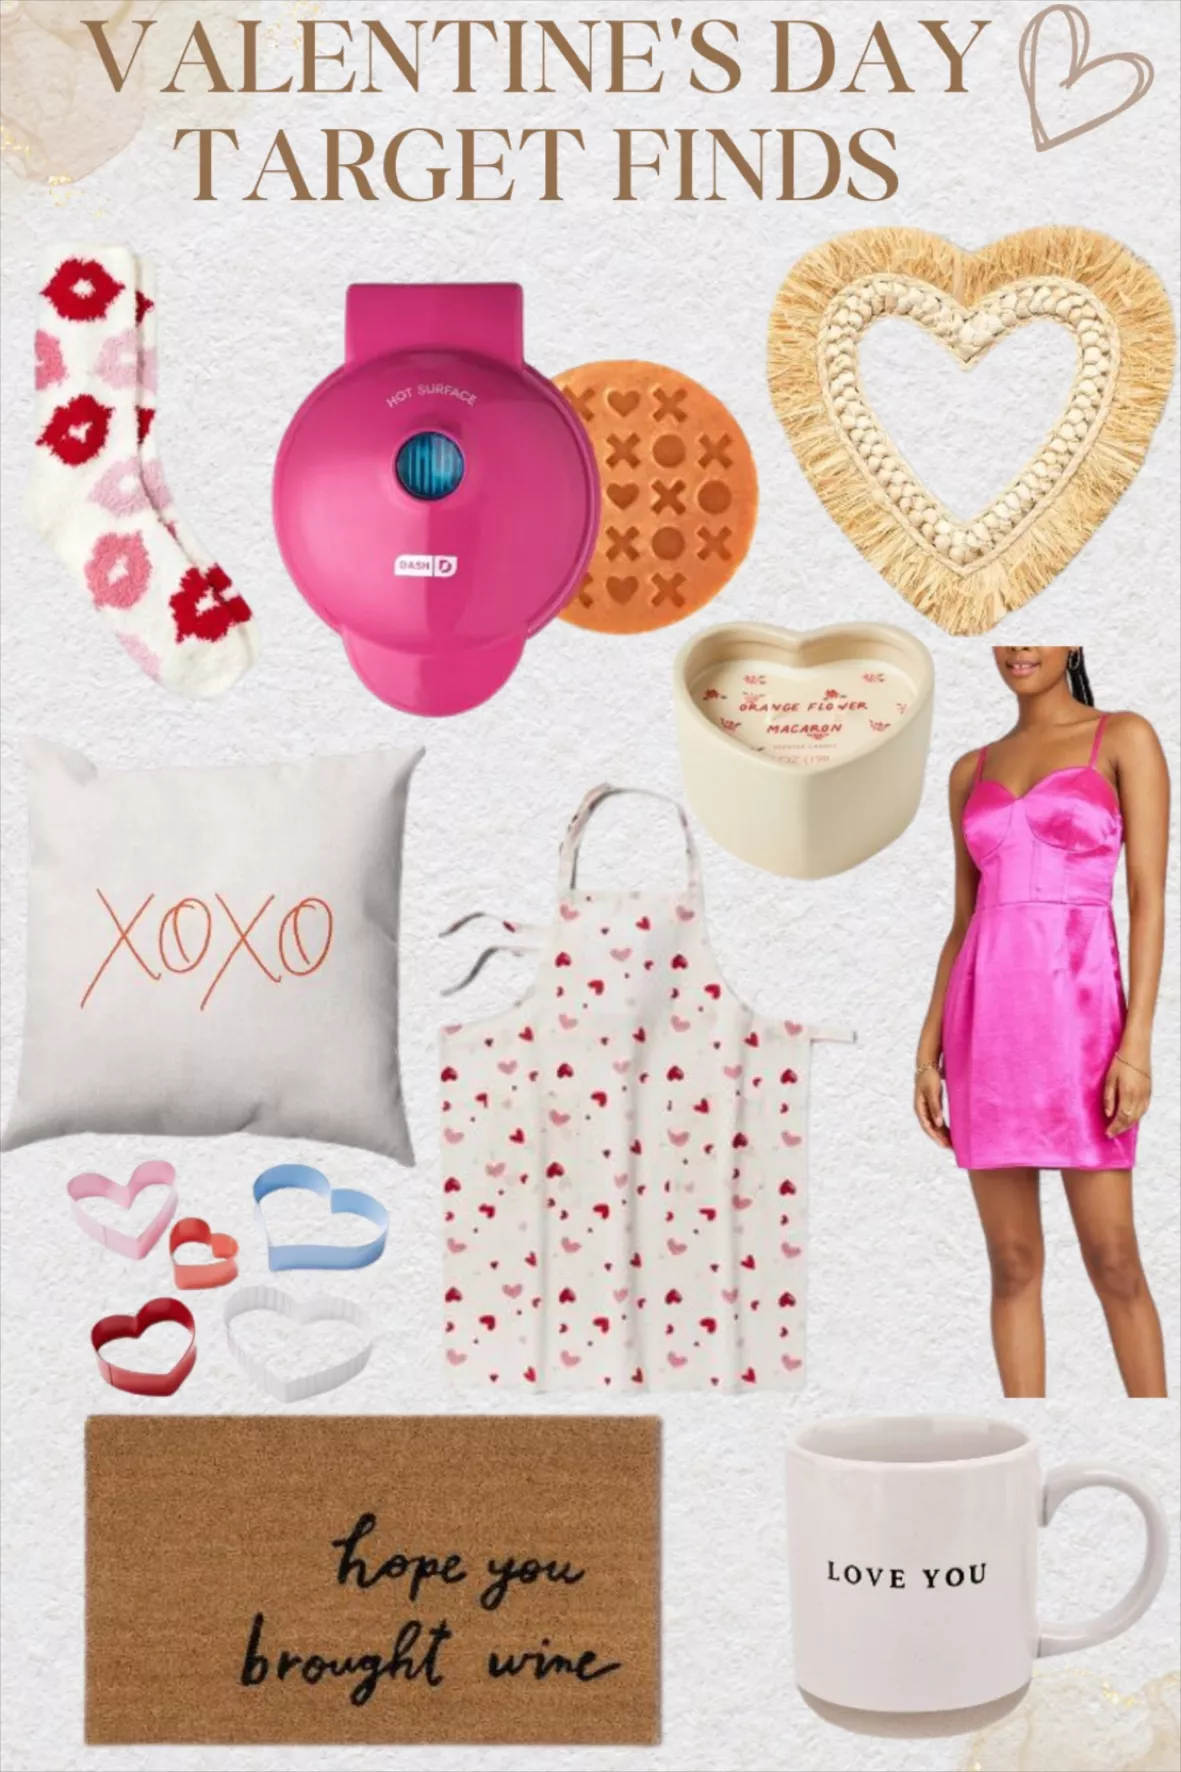 His & Hers: Casual Valentine's Day - Laura Beverlin